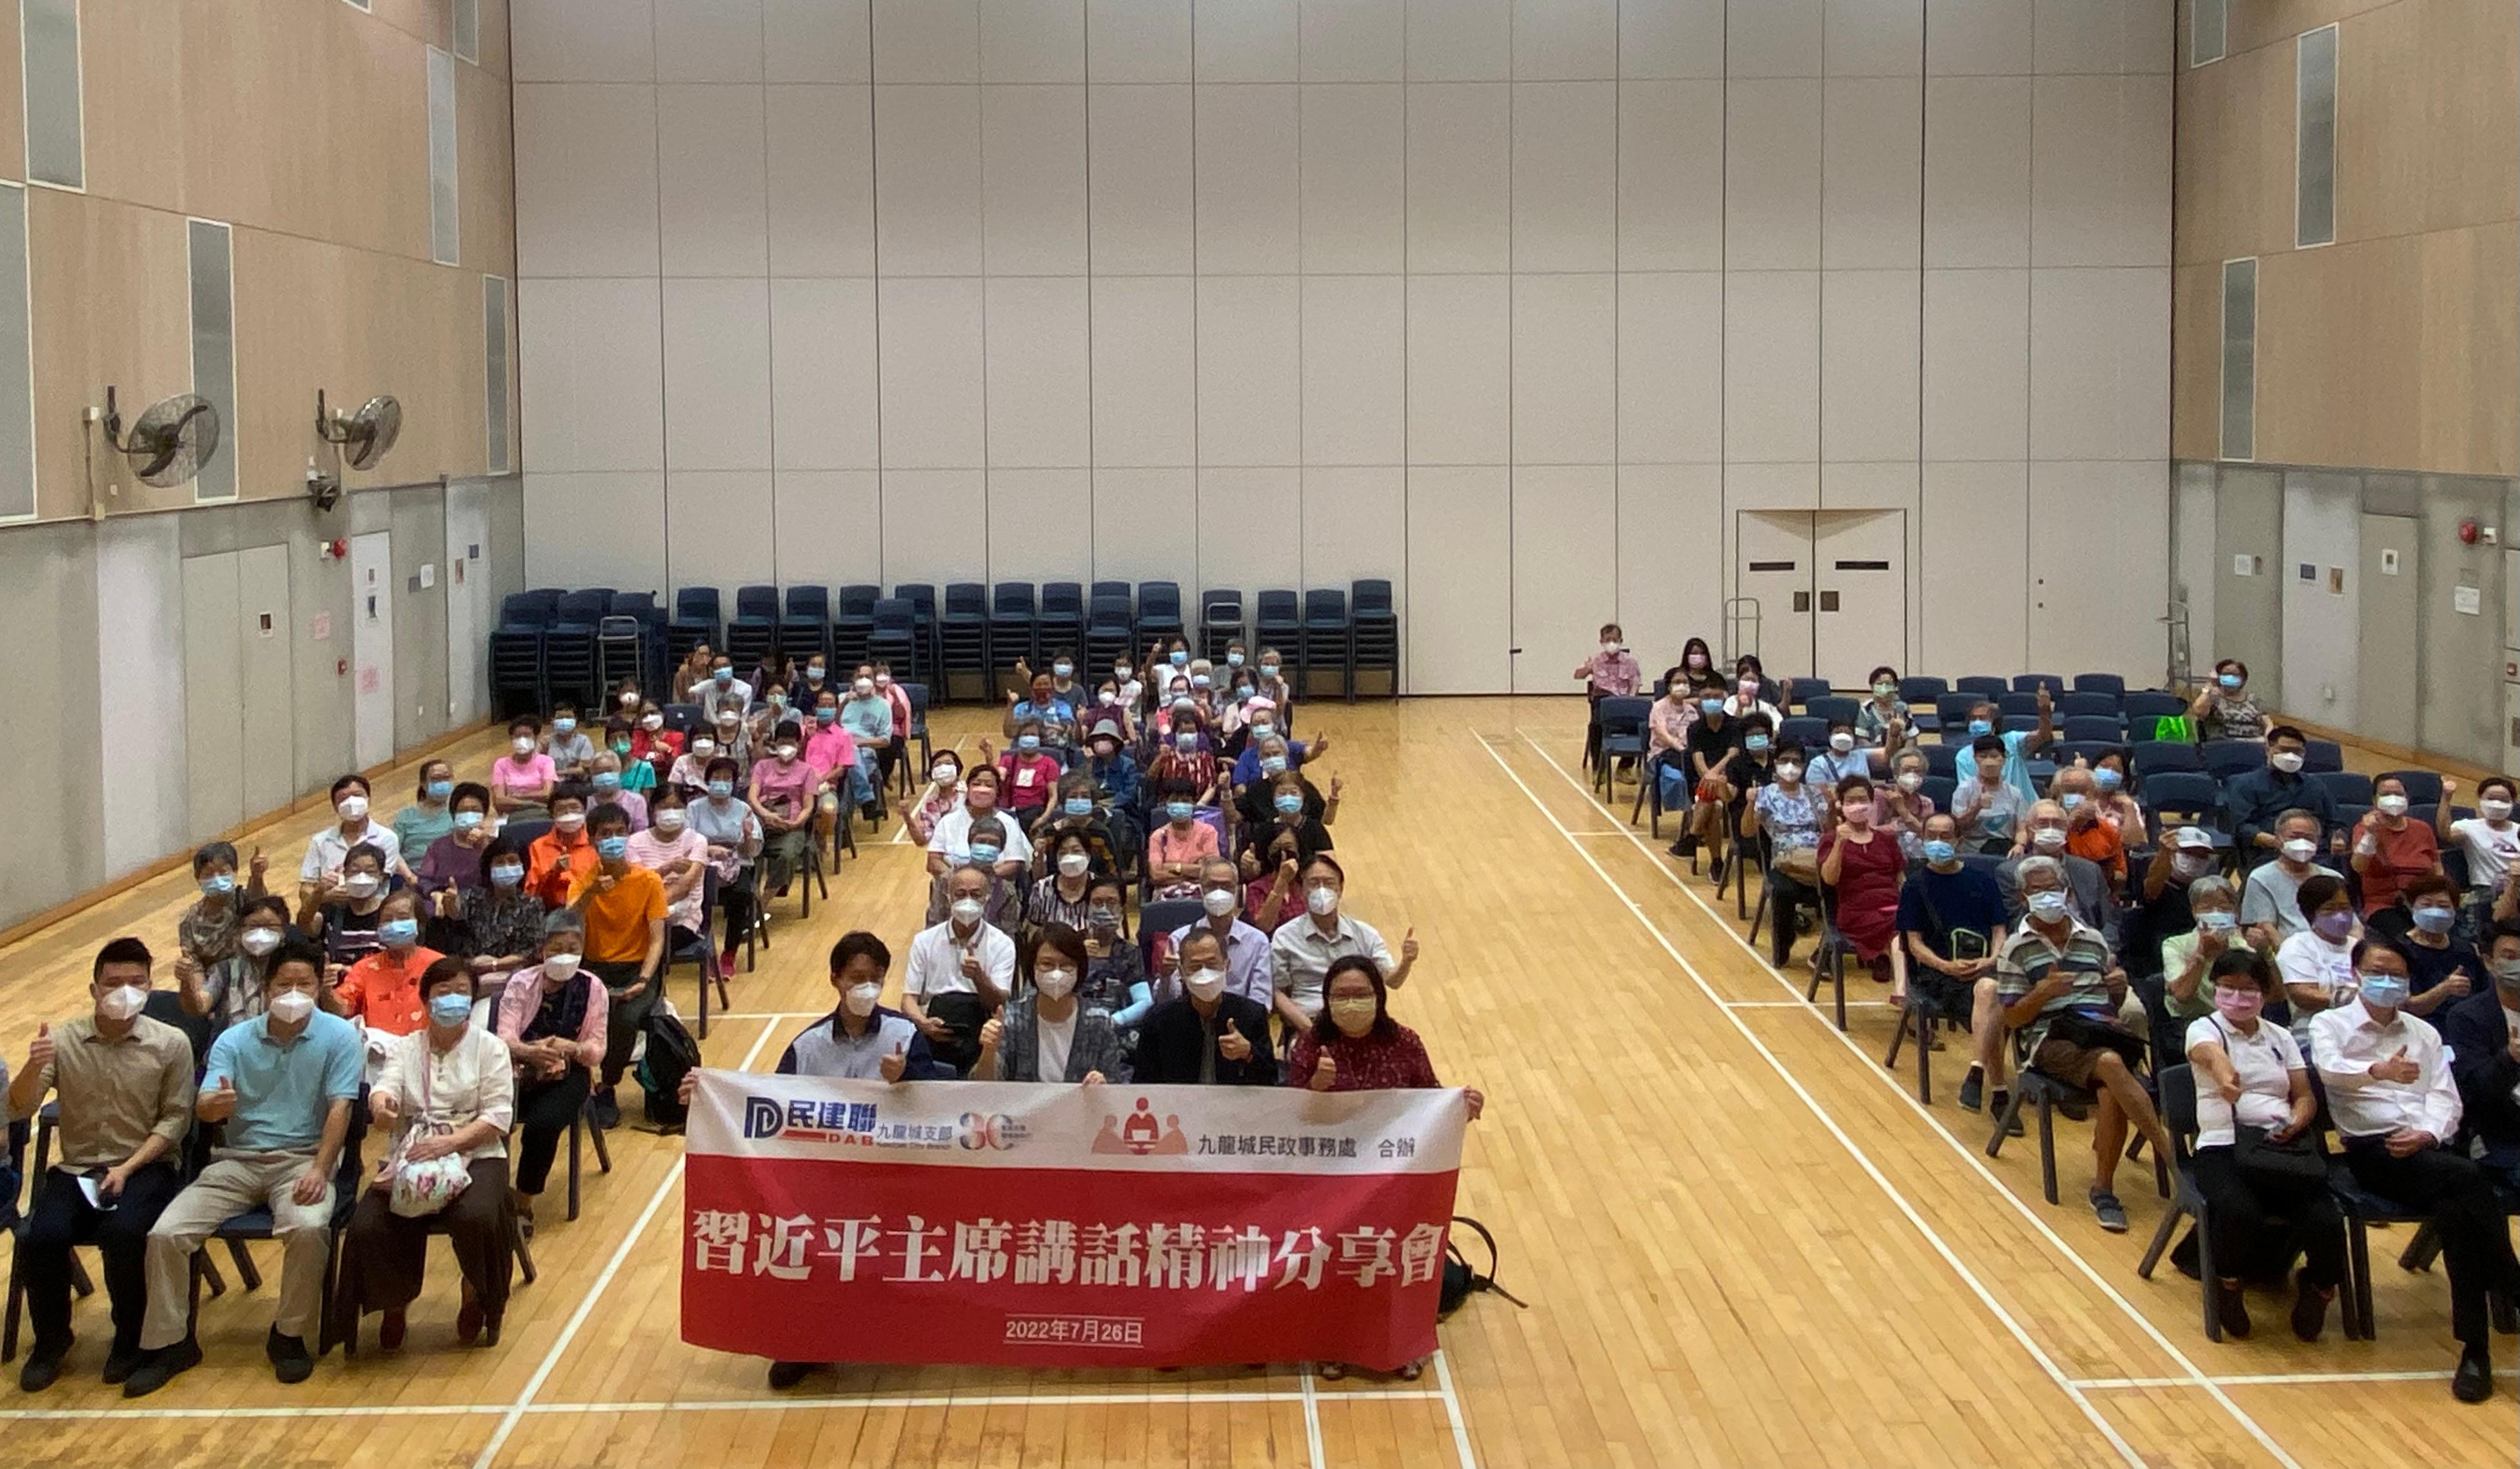 The Kowloon City District Office, in collaboration with the Kowloon City Branch of the Democratic Alliance for the Betterment and Progress of Hong Kong, jointly held the "Session to Learn About the Spirit of President Xi's Important Speech" at Hung Hom Community Hall on July 26. Photo shows the keynote speaker, guests and participants at the session.